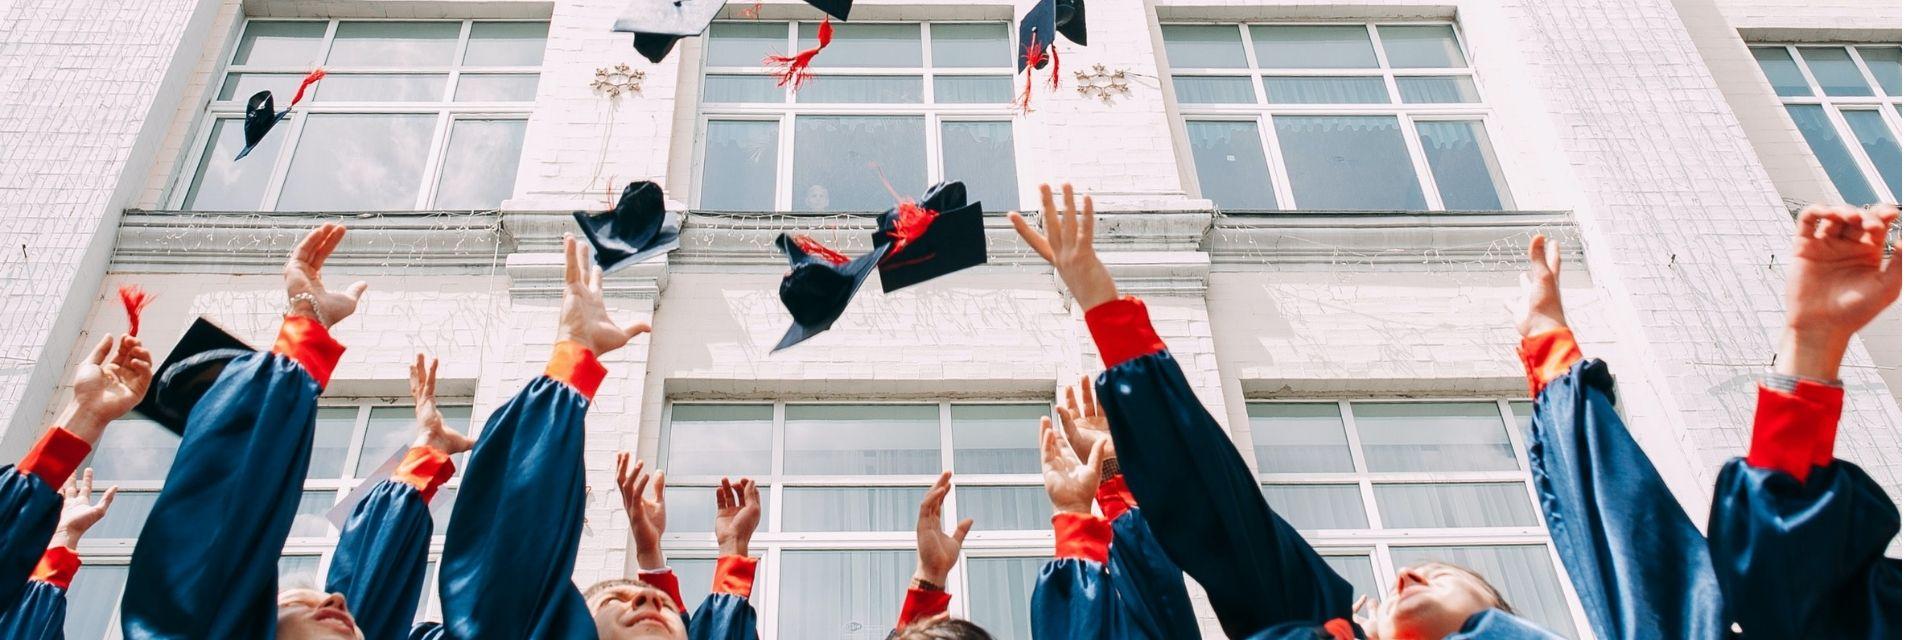 Graduation caps in air with student arms visible